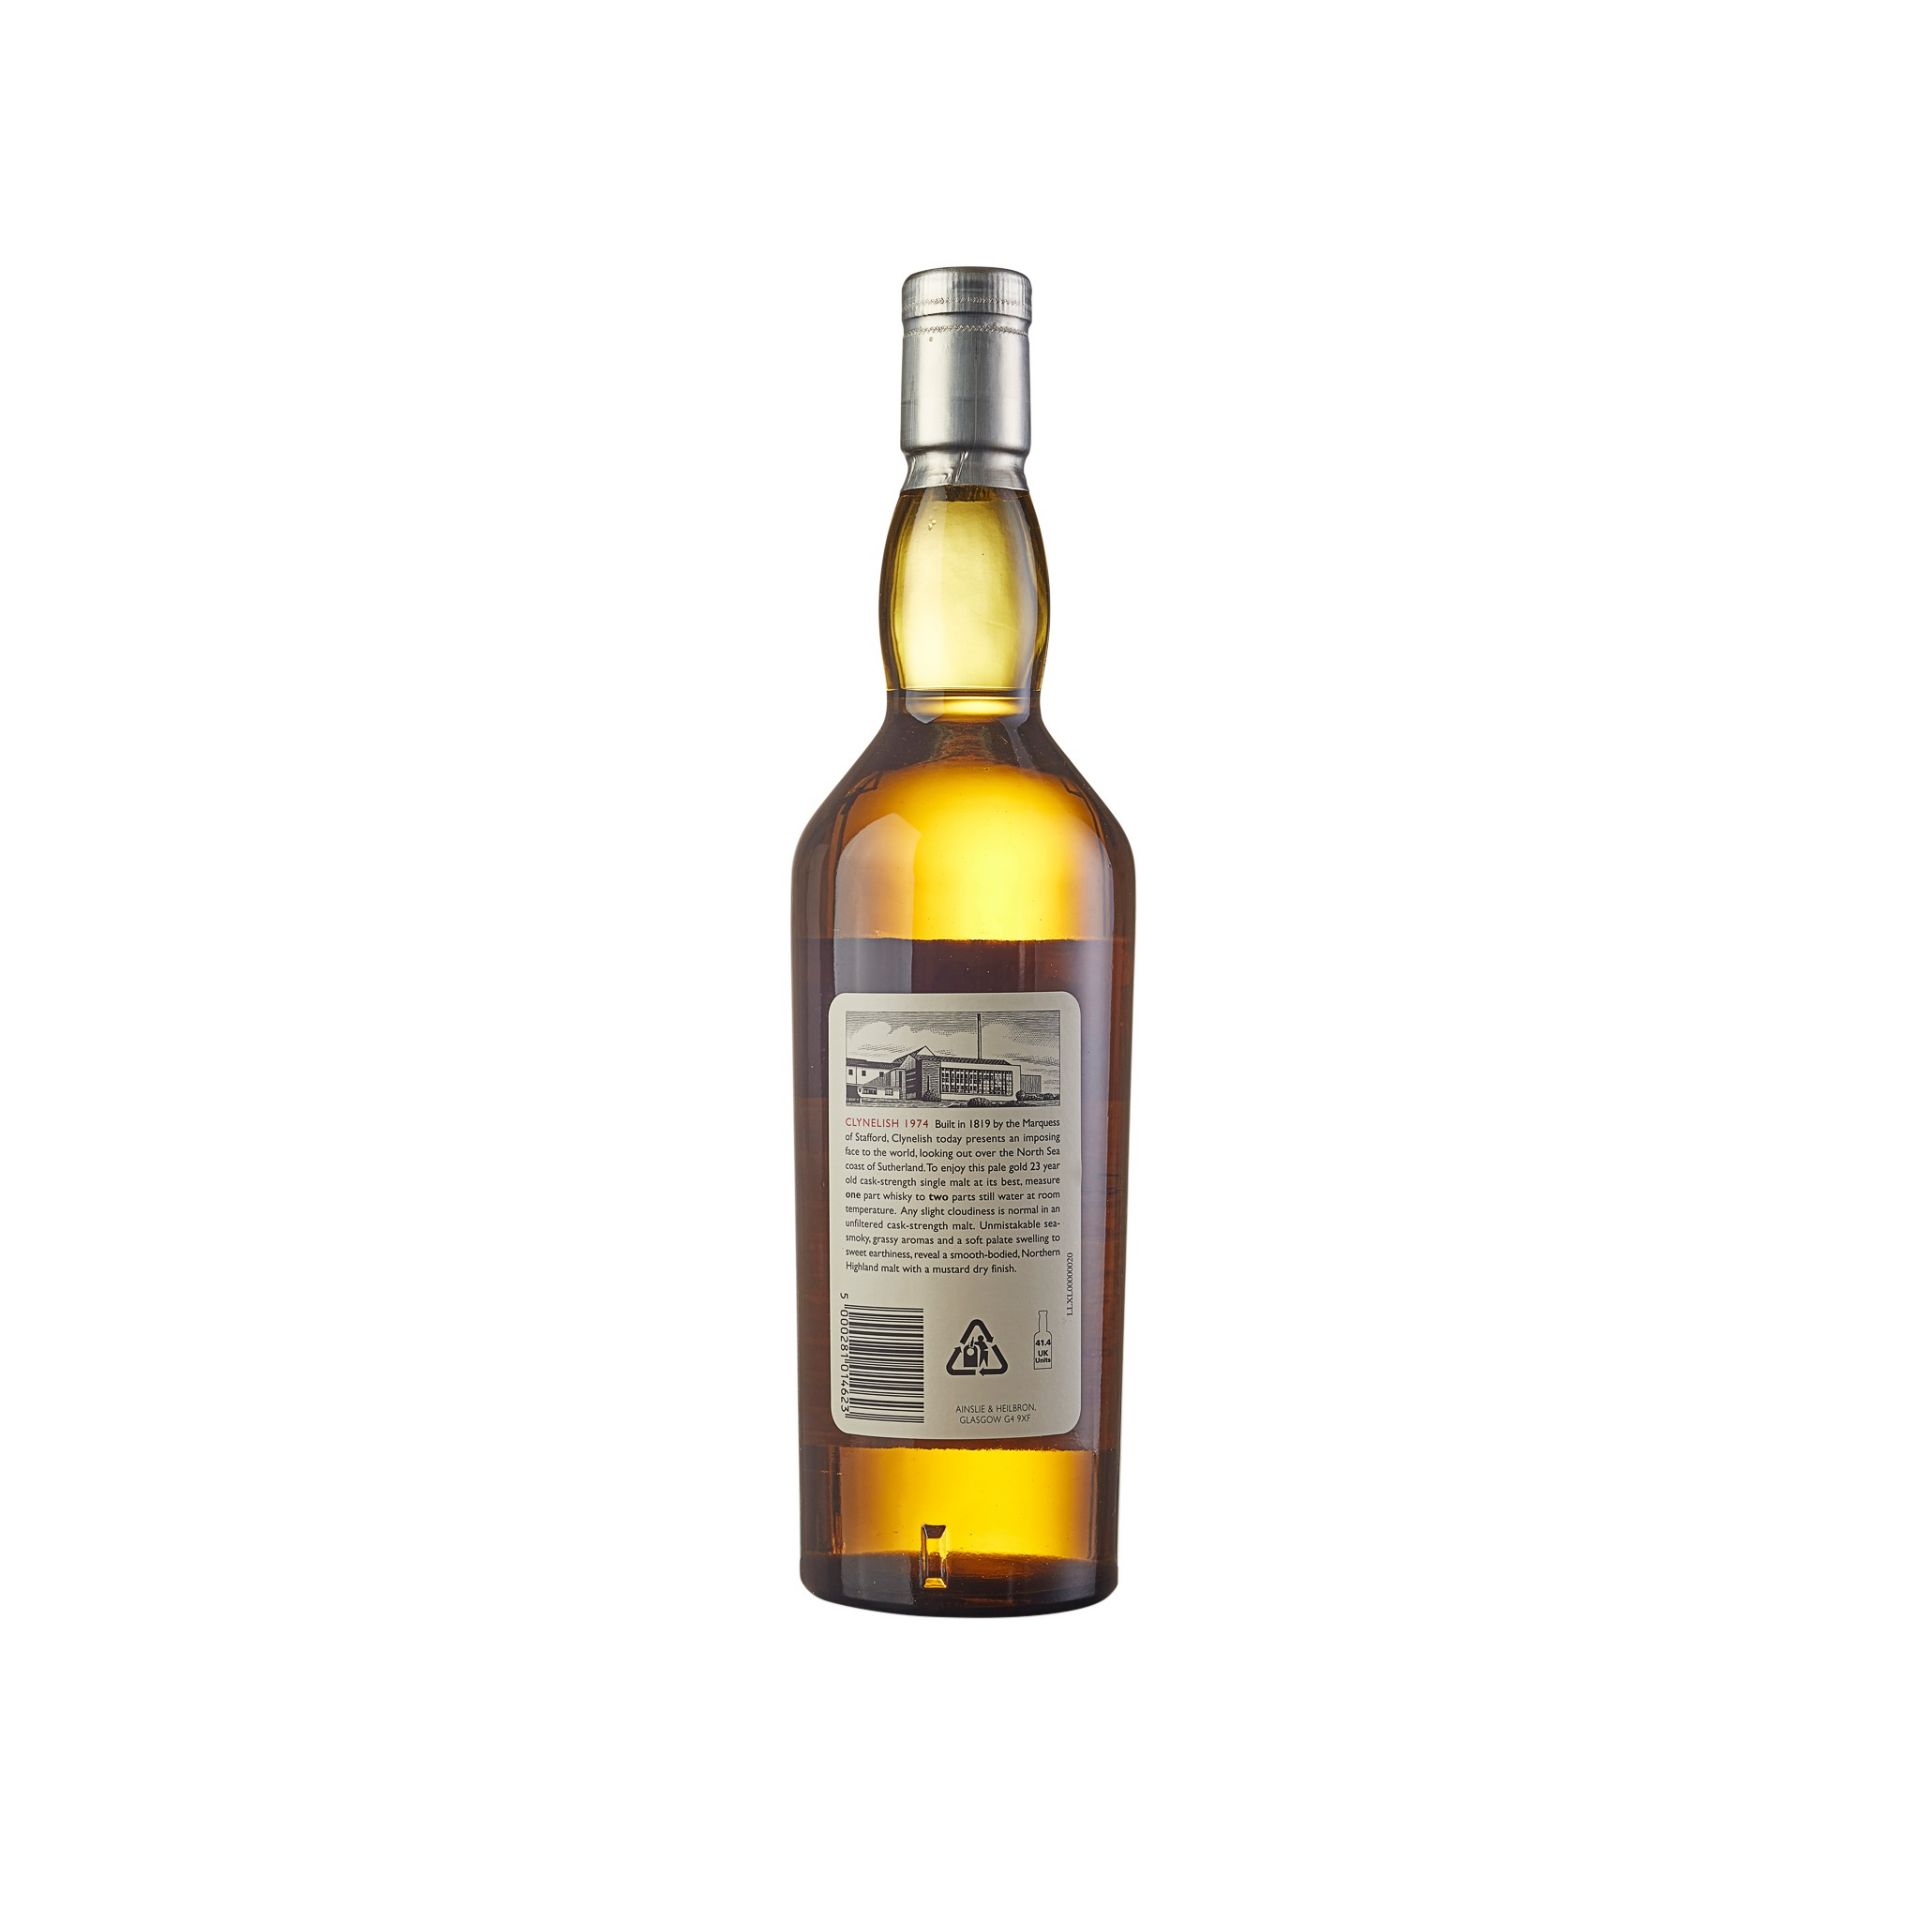 CLYNELISH 1974 23 YEAR OLD - RARE MALTS SELECTION - Image 3 of 3